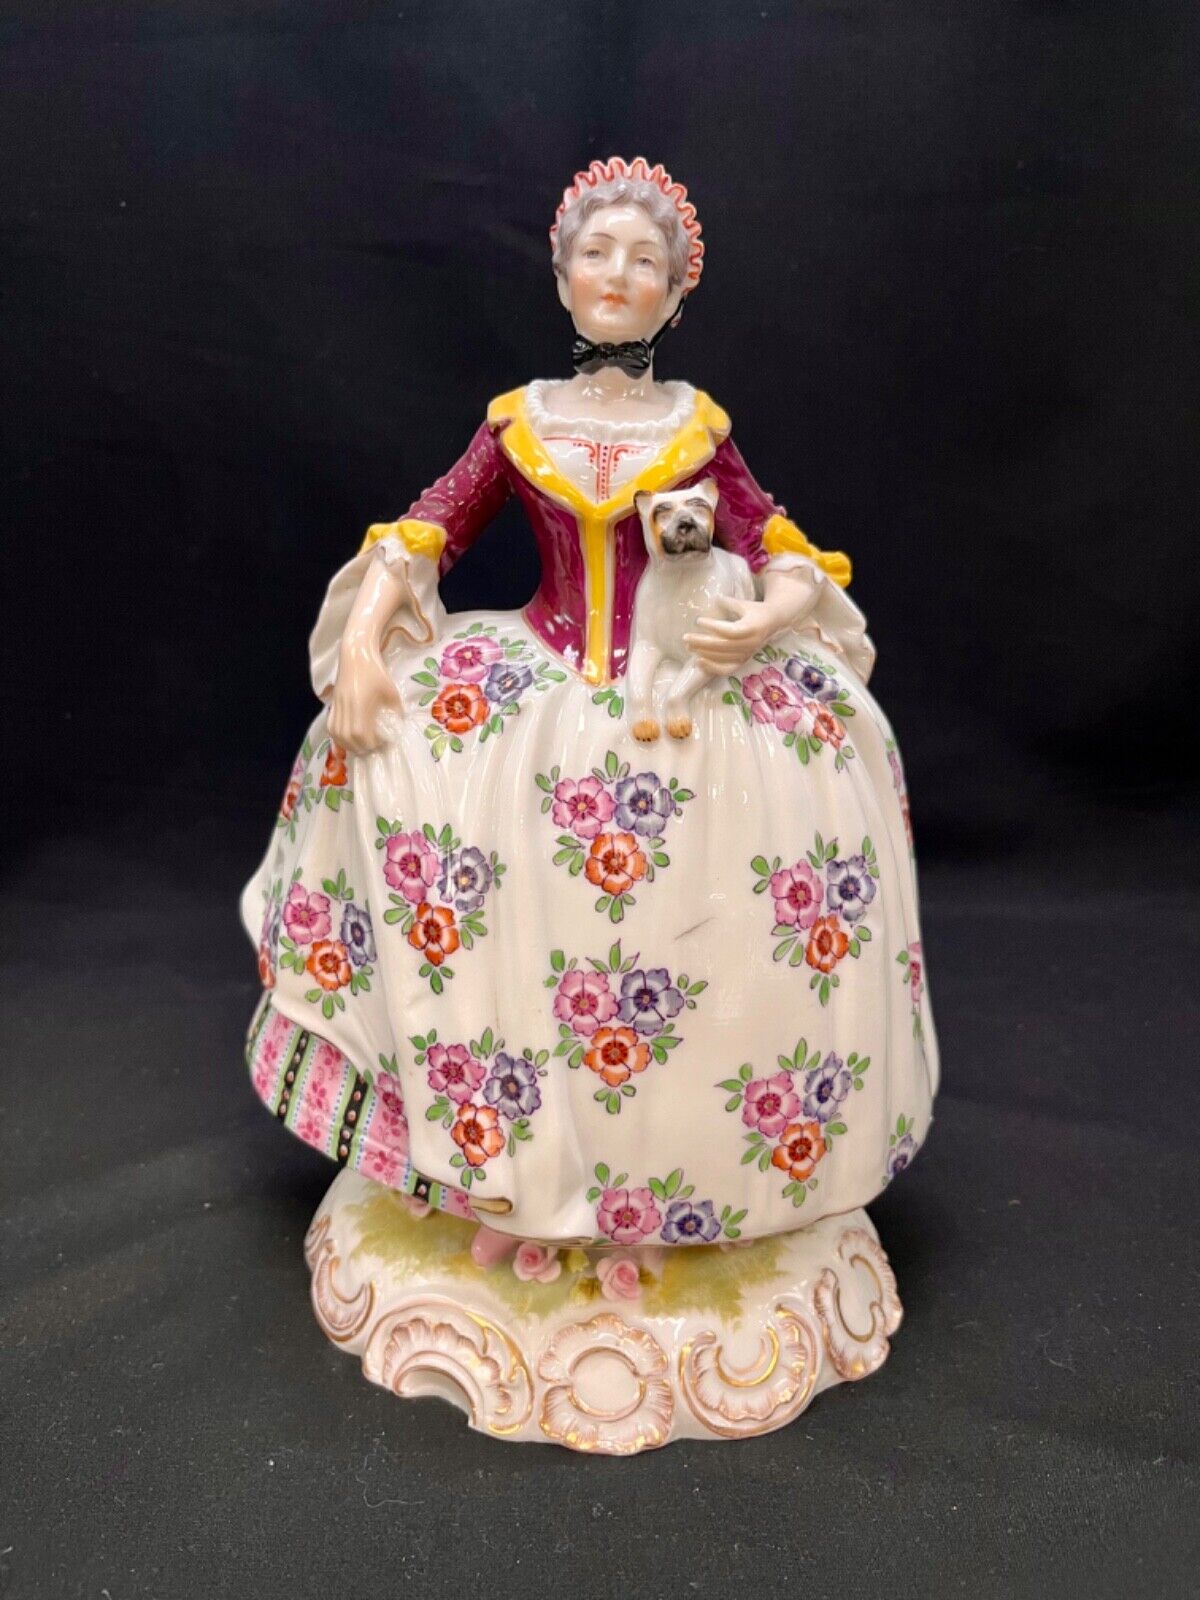 Antique 19th Century Porcelain Victorian Woman with Dog Hand Painted Figurine